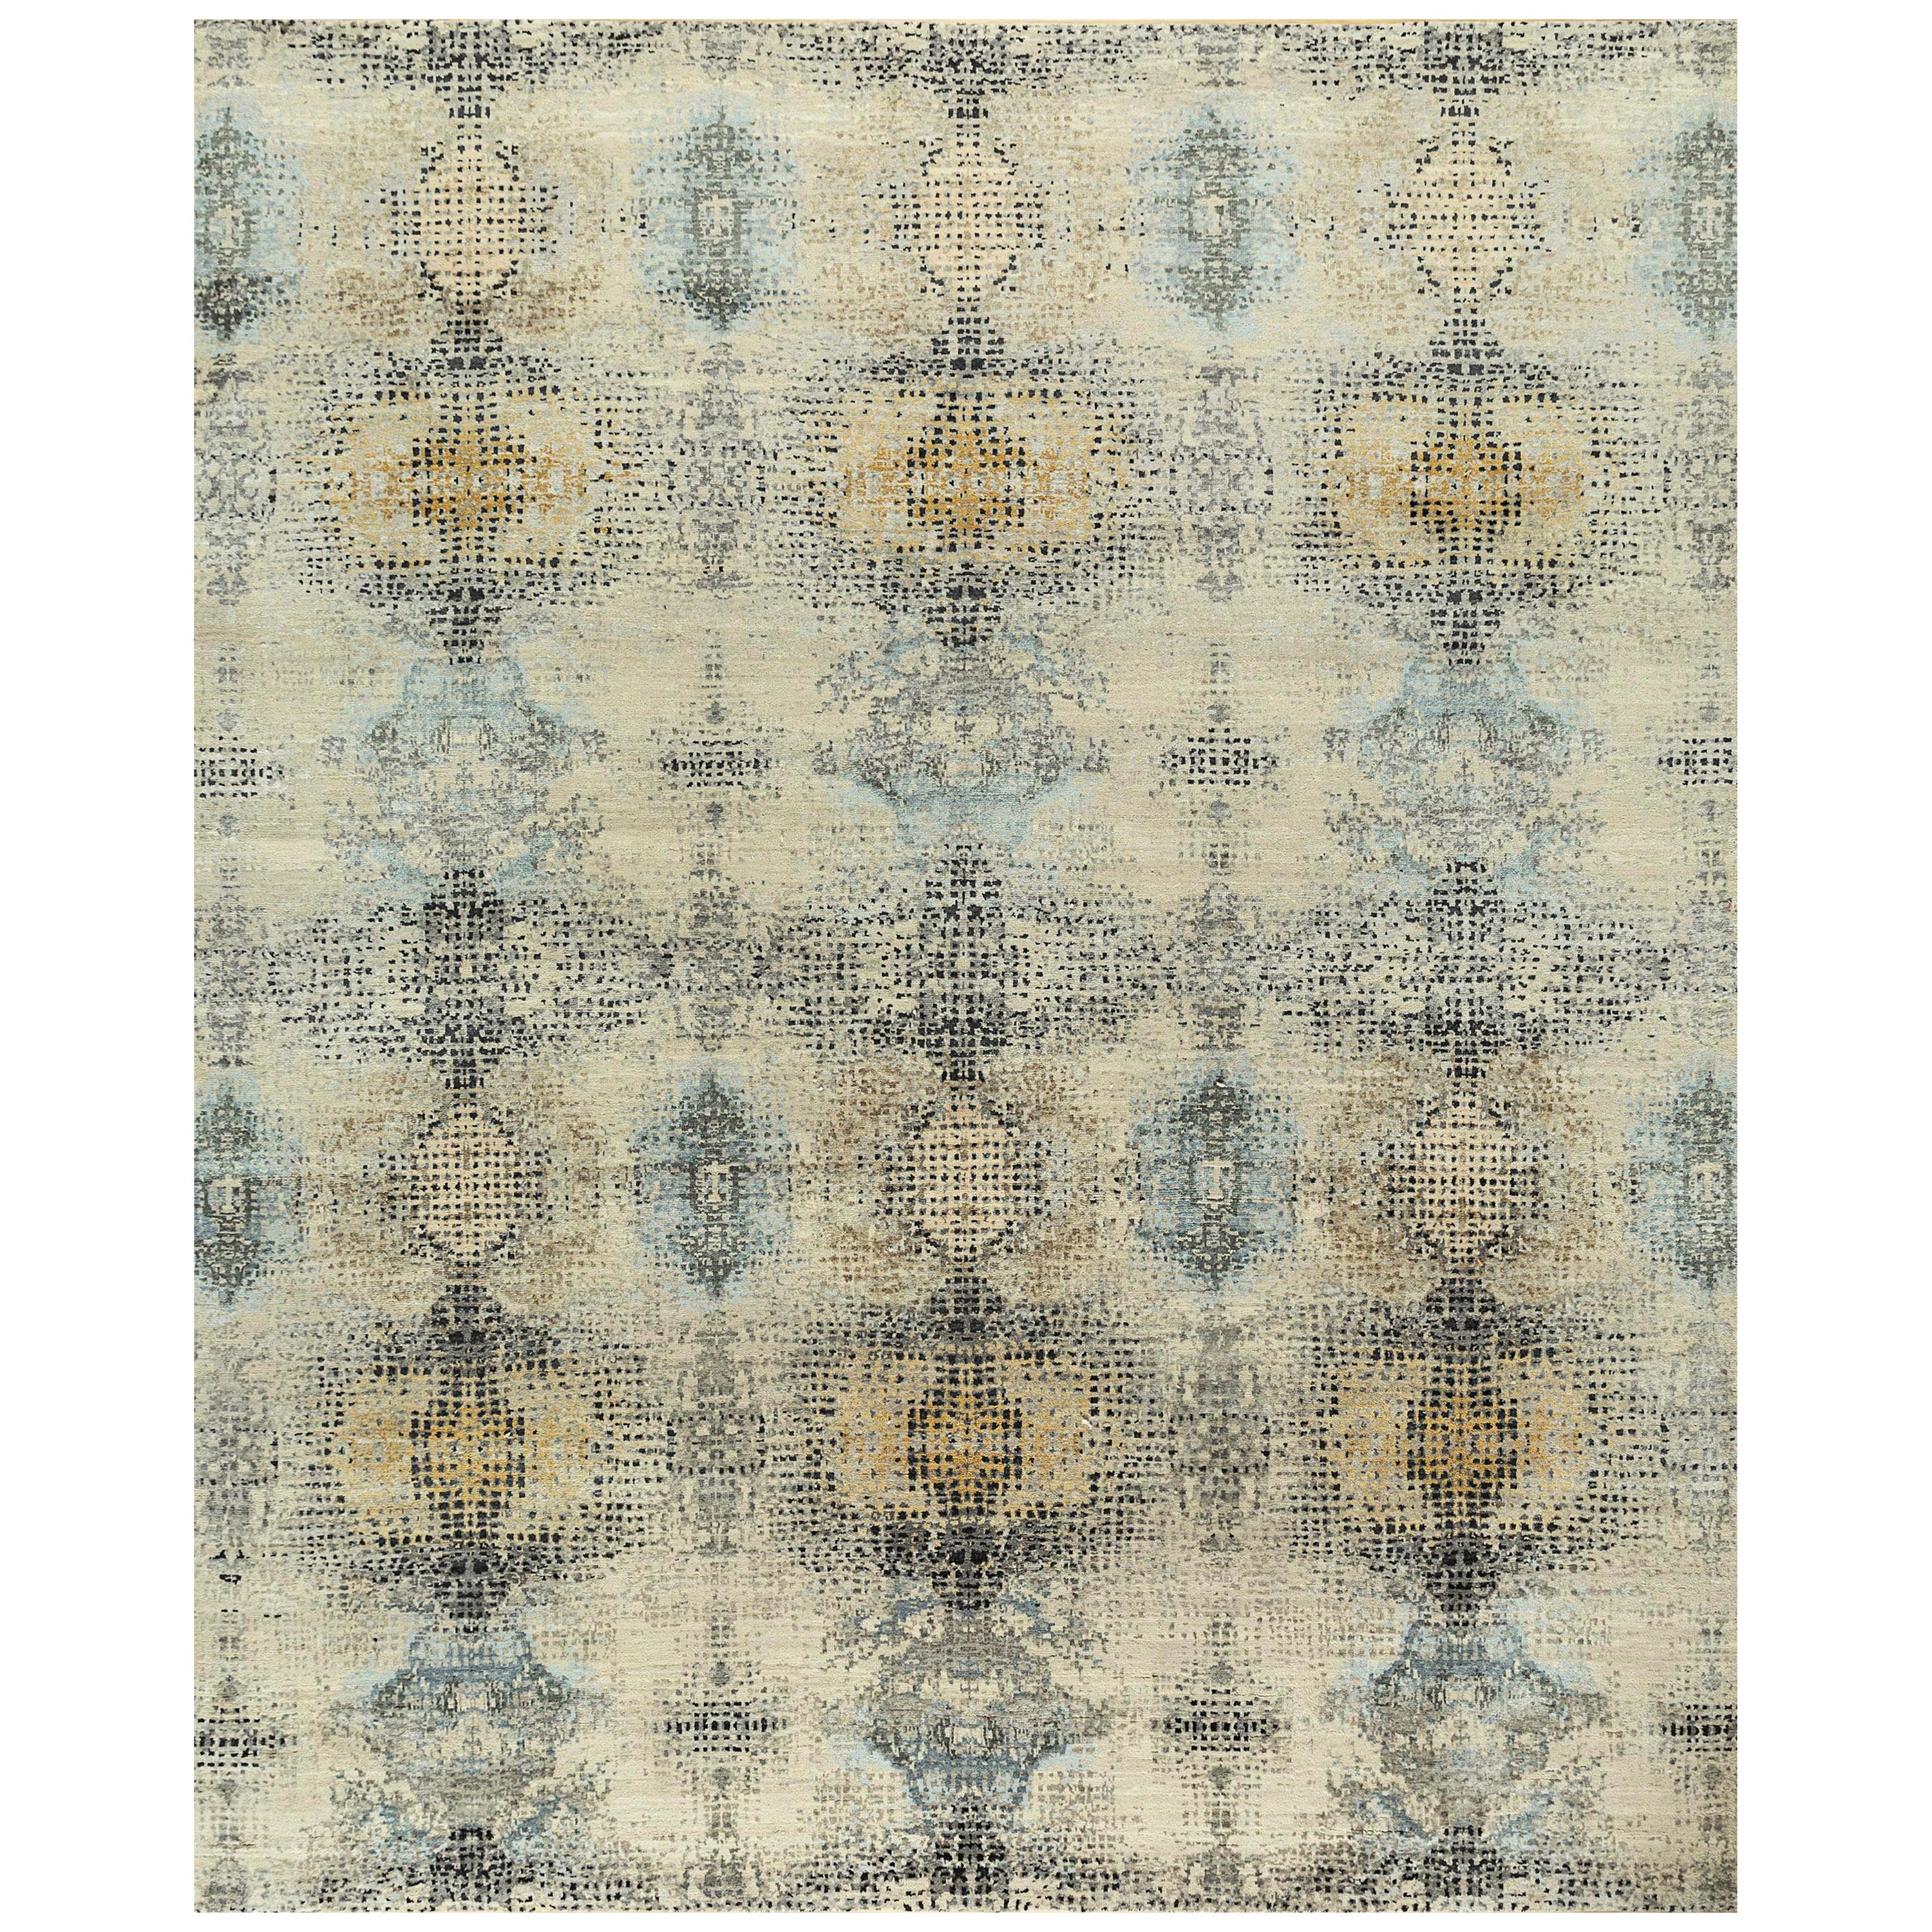 Beyond Horizons Antique White & Blue Blush 195X295 cm Handknotted Rug For Sale